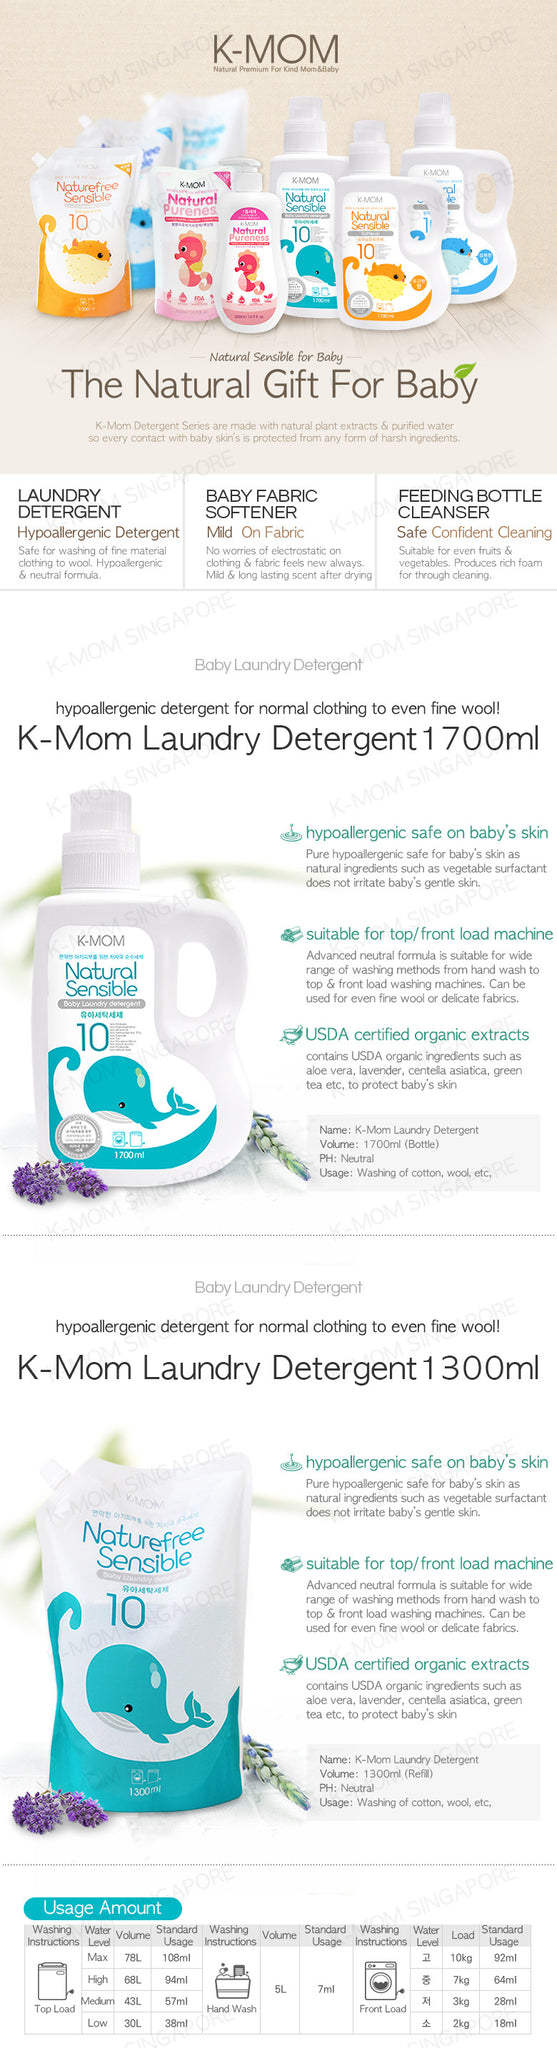 K-Mom Natural Sensible Baby Laundry Detergent (1700ml)